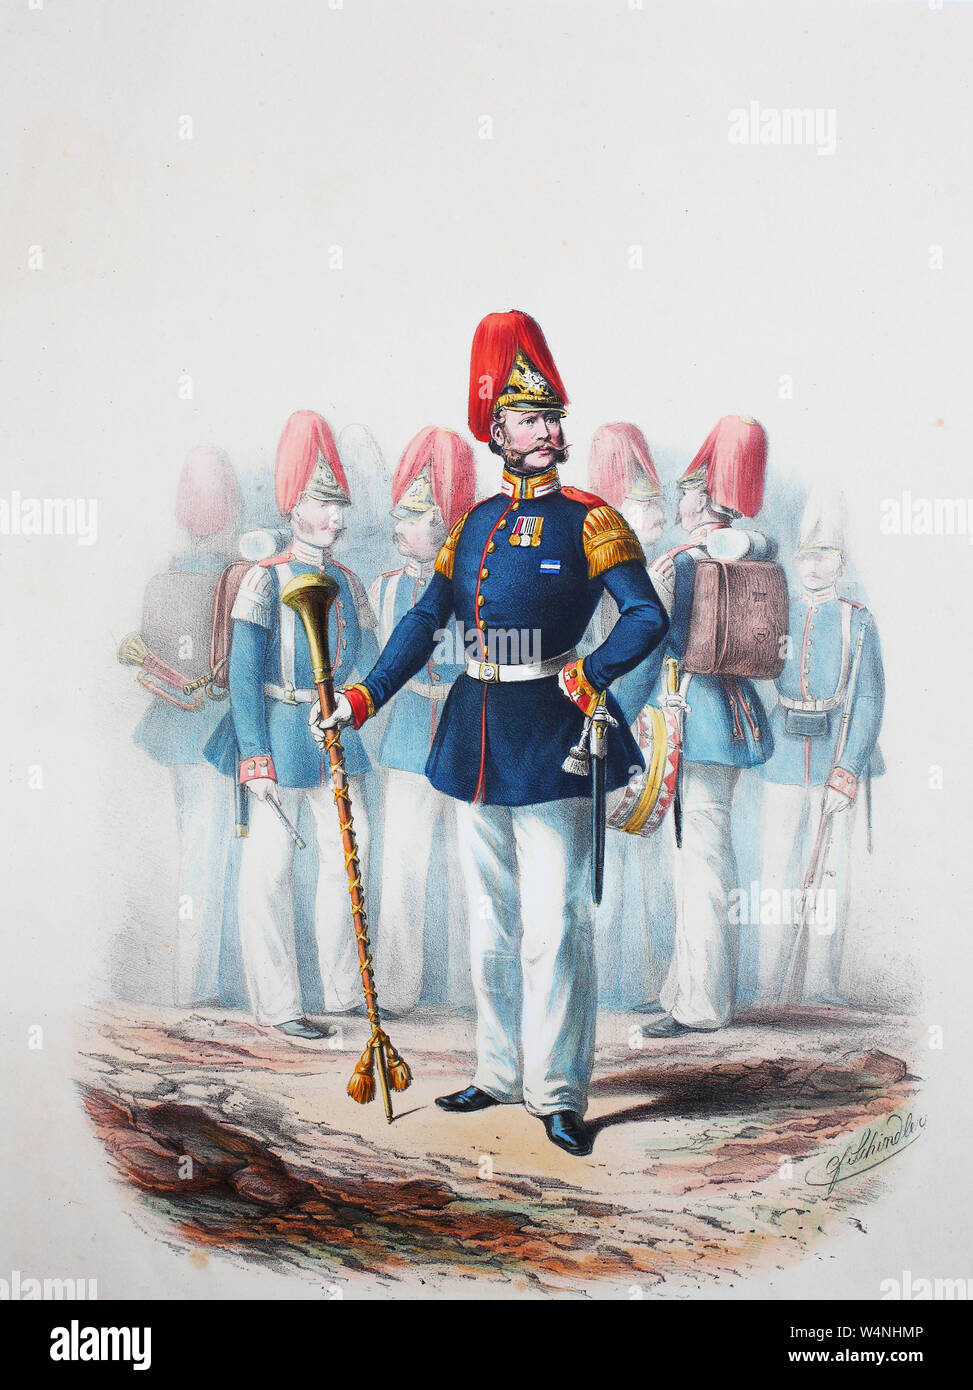 Royal Prussian Army, Guards Corps, Preußens Heer, preussische Garde, Garde Regiment zu Fuß, Hornist, Tambour, Trommler, Digital improved reproduction of an illustration from the 19th century Stock Photo